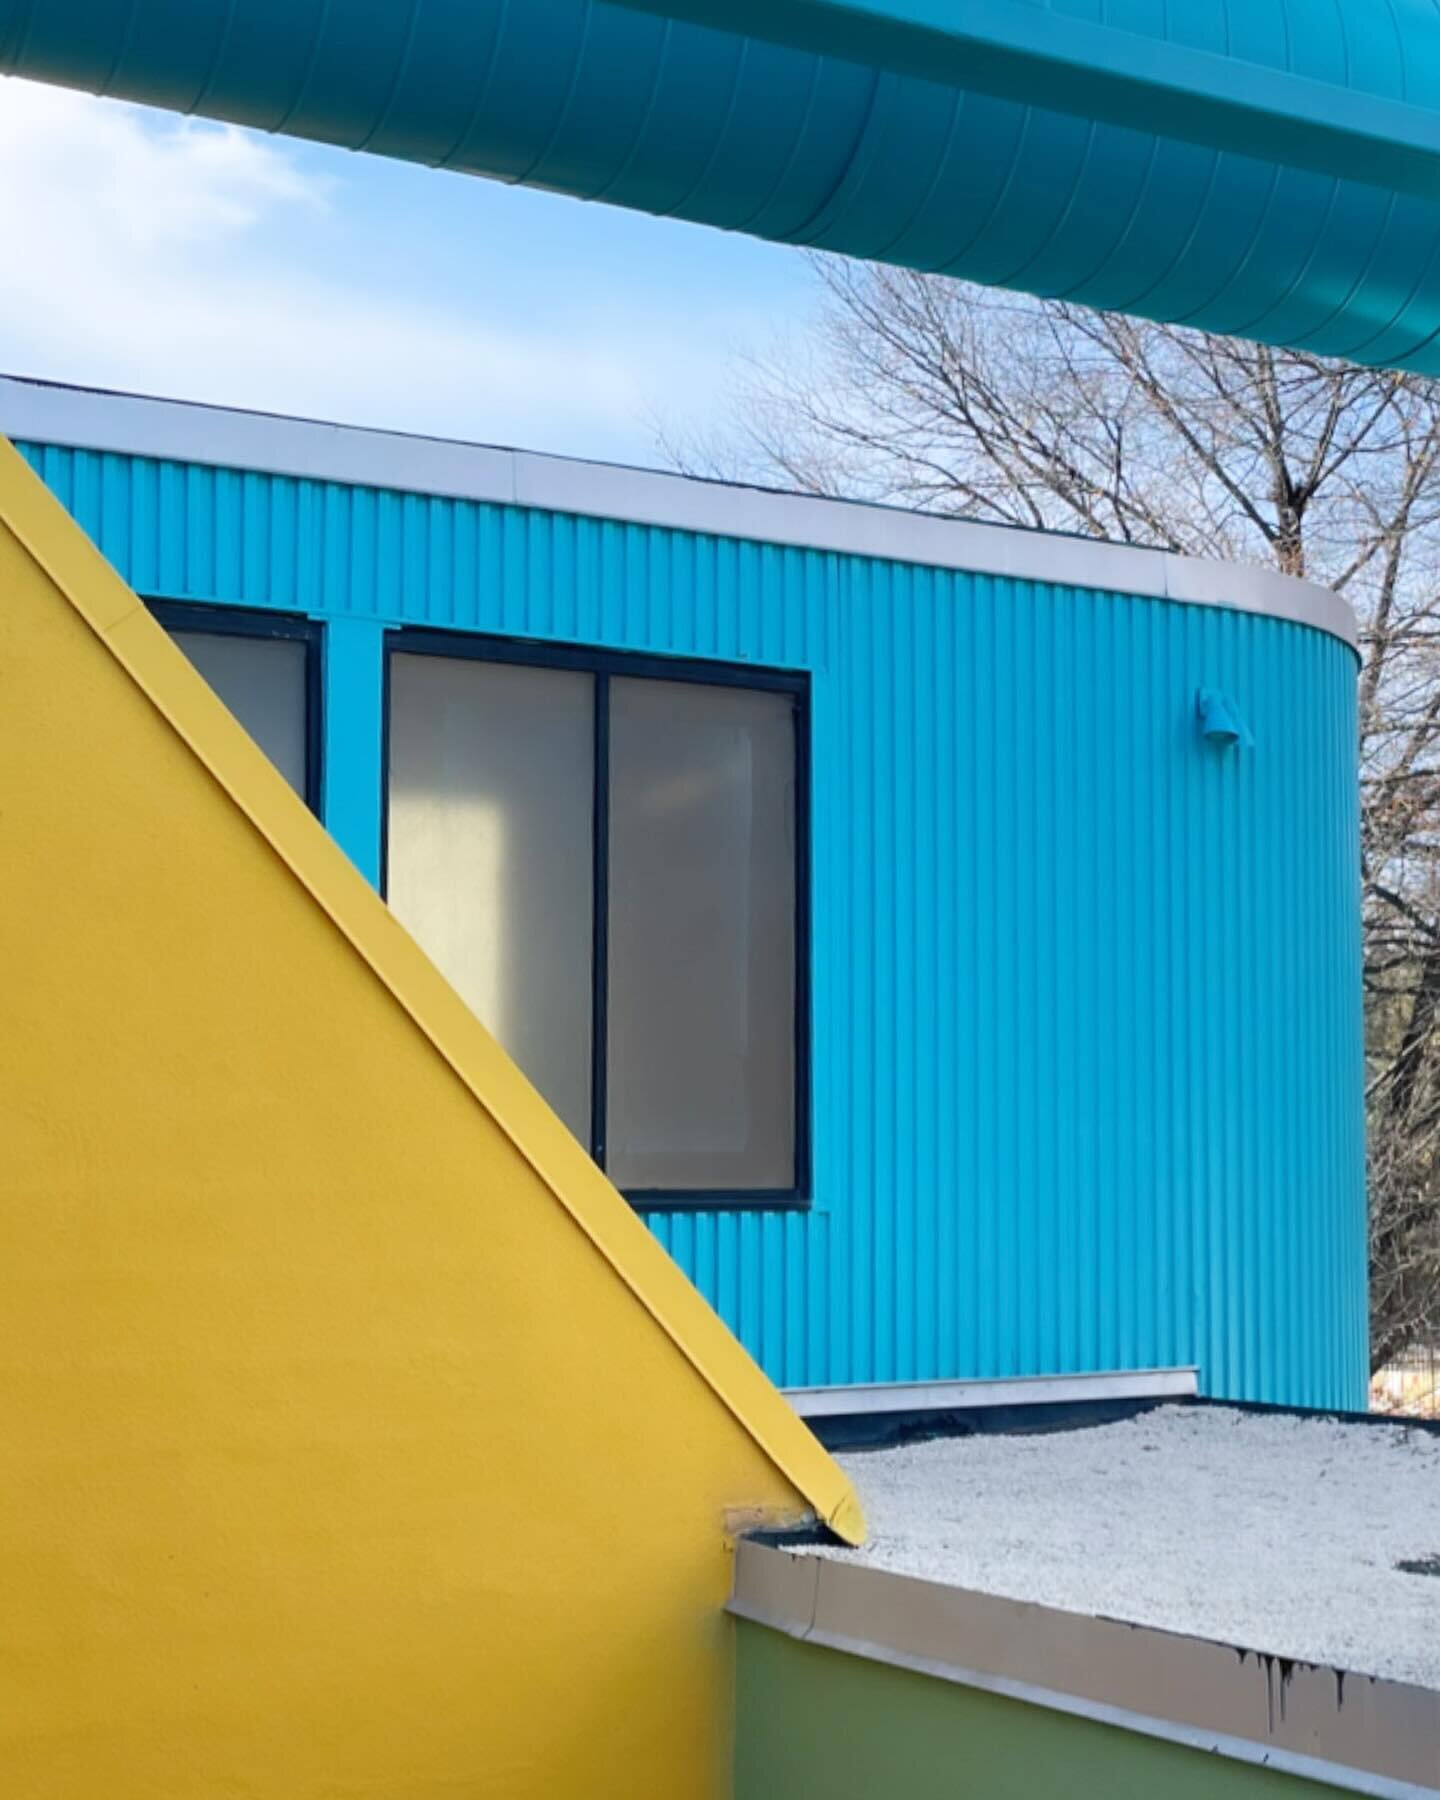 Things we&rsquo;re looking forward to in 2024: Poppleton Rec Center!

We are getting closer to completion on this colorful rec center renovation in West Baltimore. In the meantime, check out some progress photos from a studio site visit we took befor